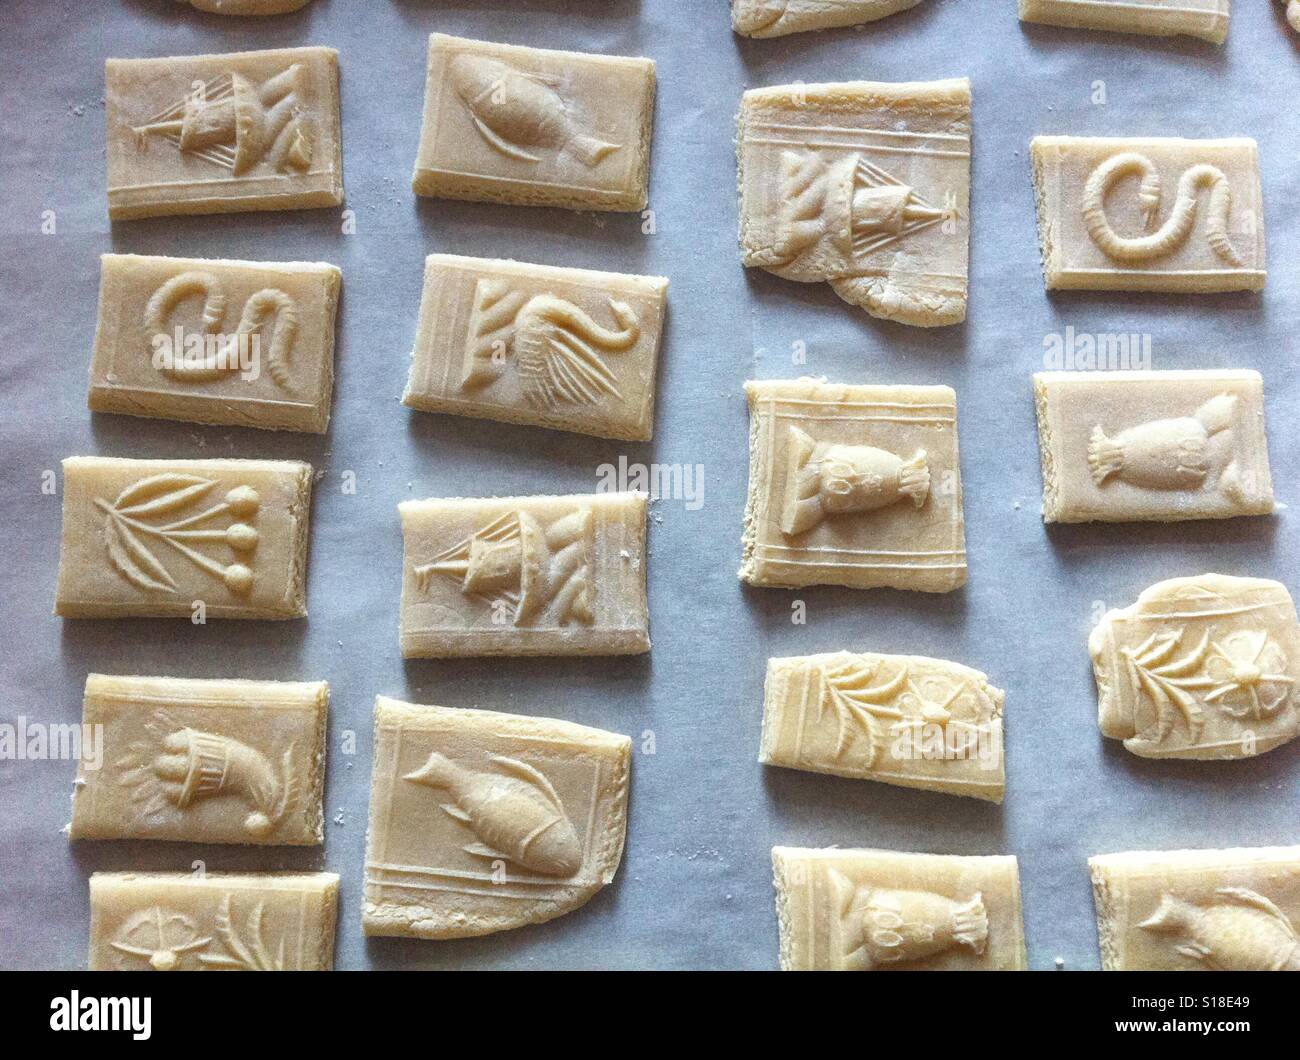 Springerle German anise pressed cookies drying prior to baking. Stock Photo